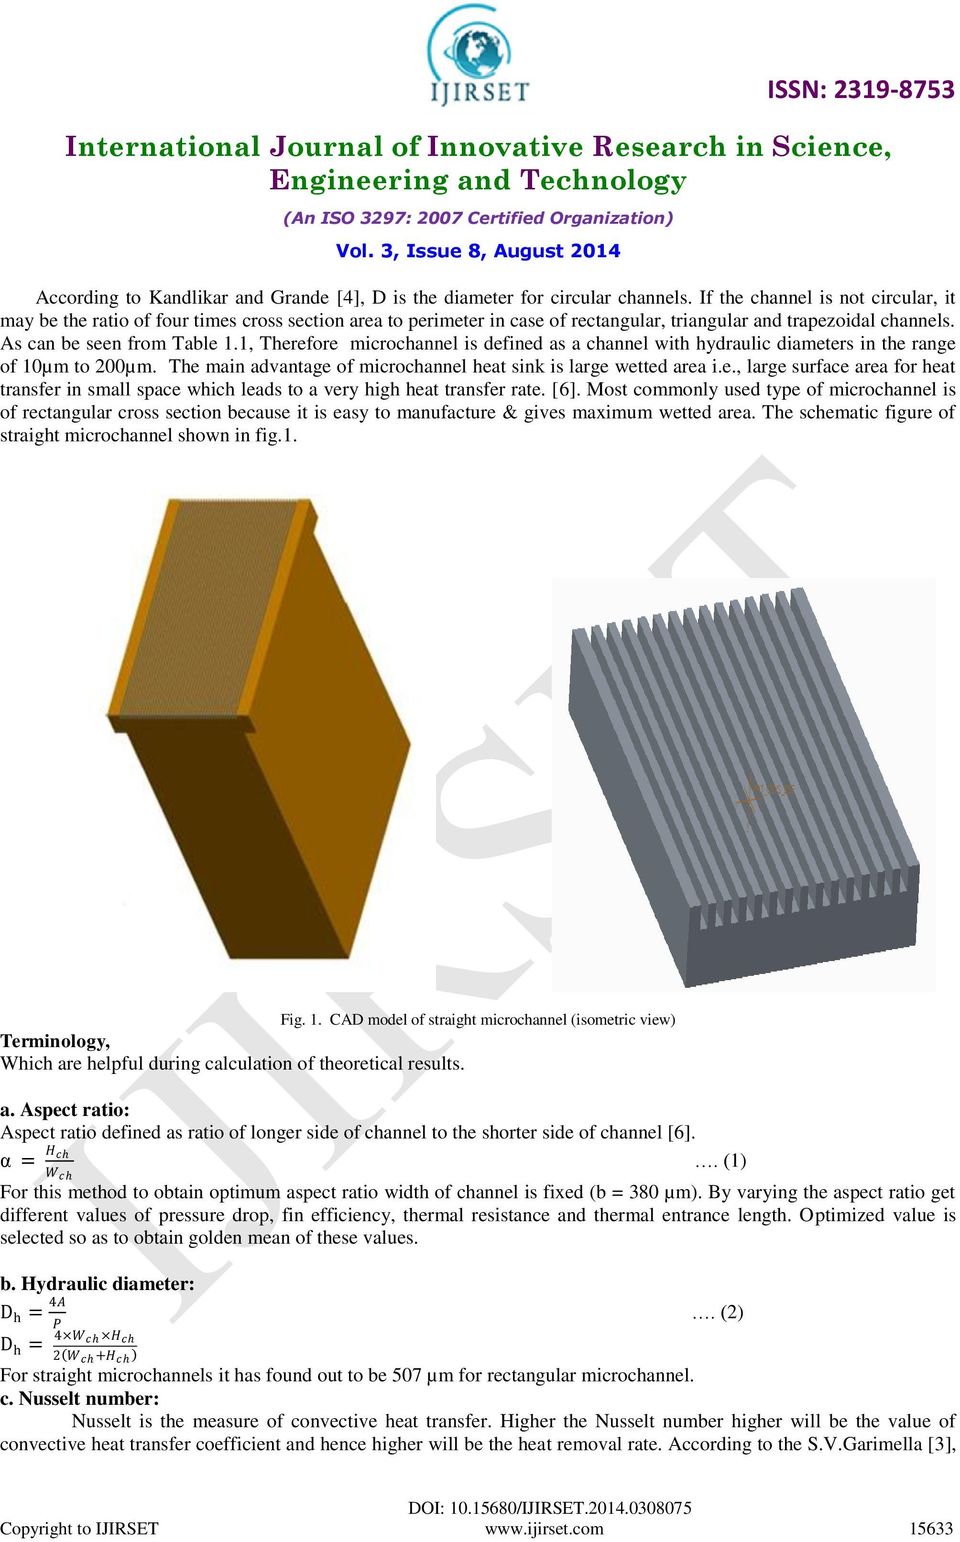 1, Therefore microchannel is defined as a channel with hydraulic diameters in the range of 10µm to 200µm. The main advantage of microchannel heat sink is large wetted area i.e., large surface area for heat transfer in small space which leads to a very high heat transfer rate.